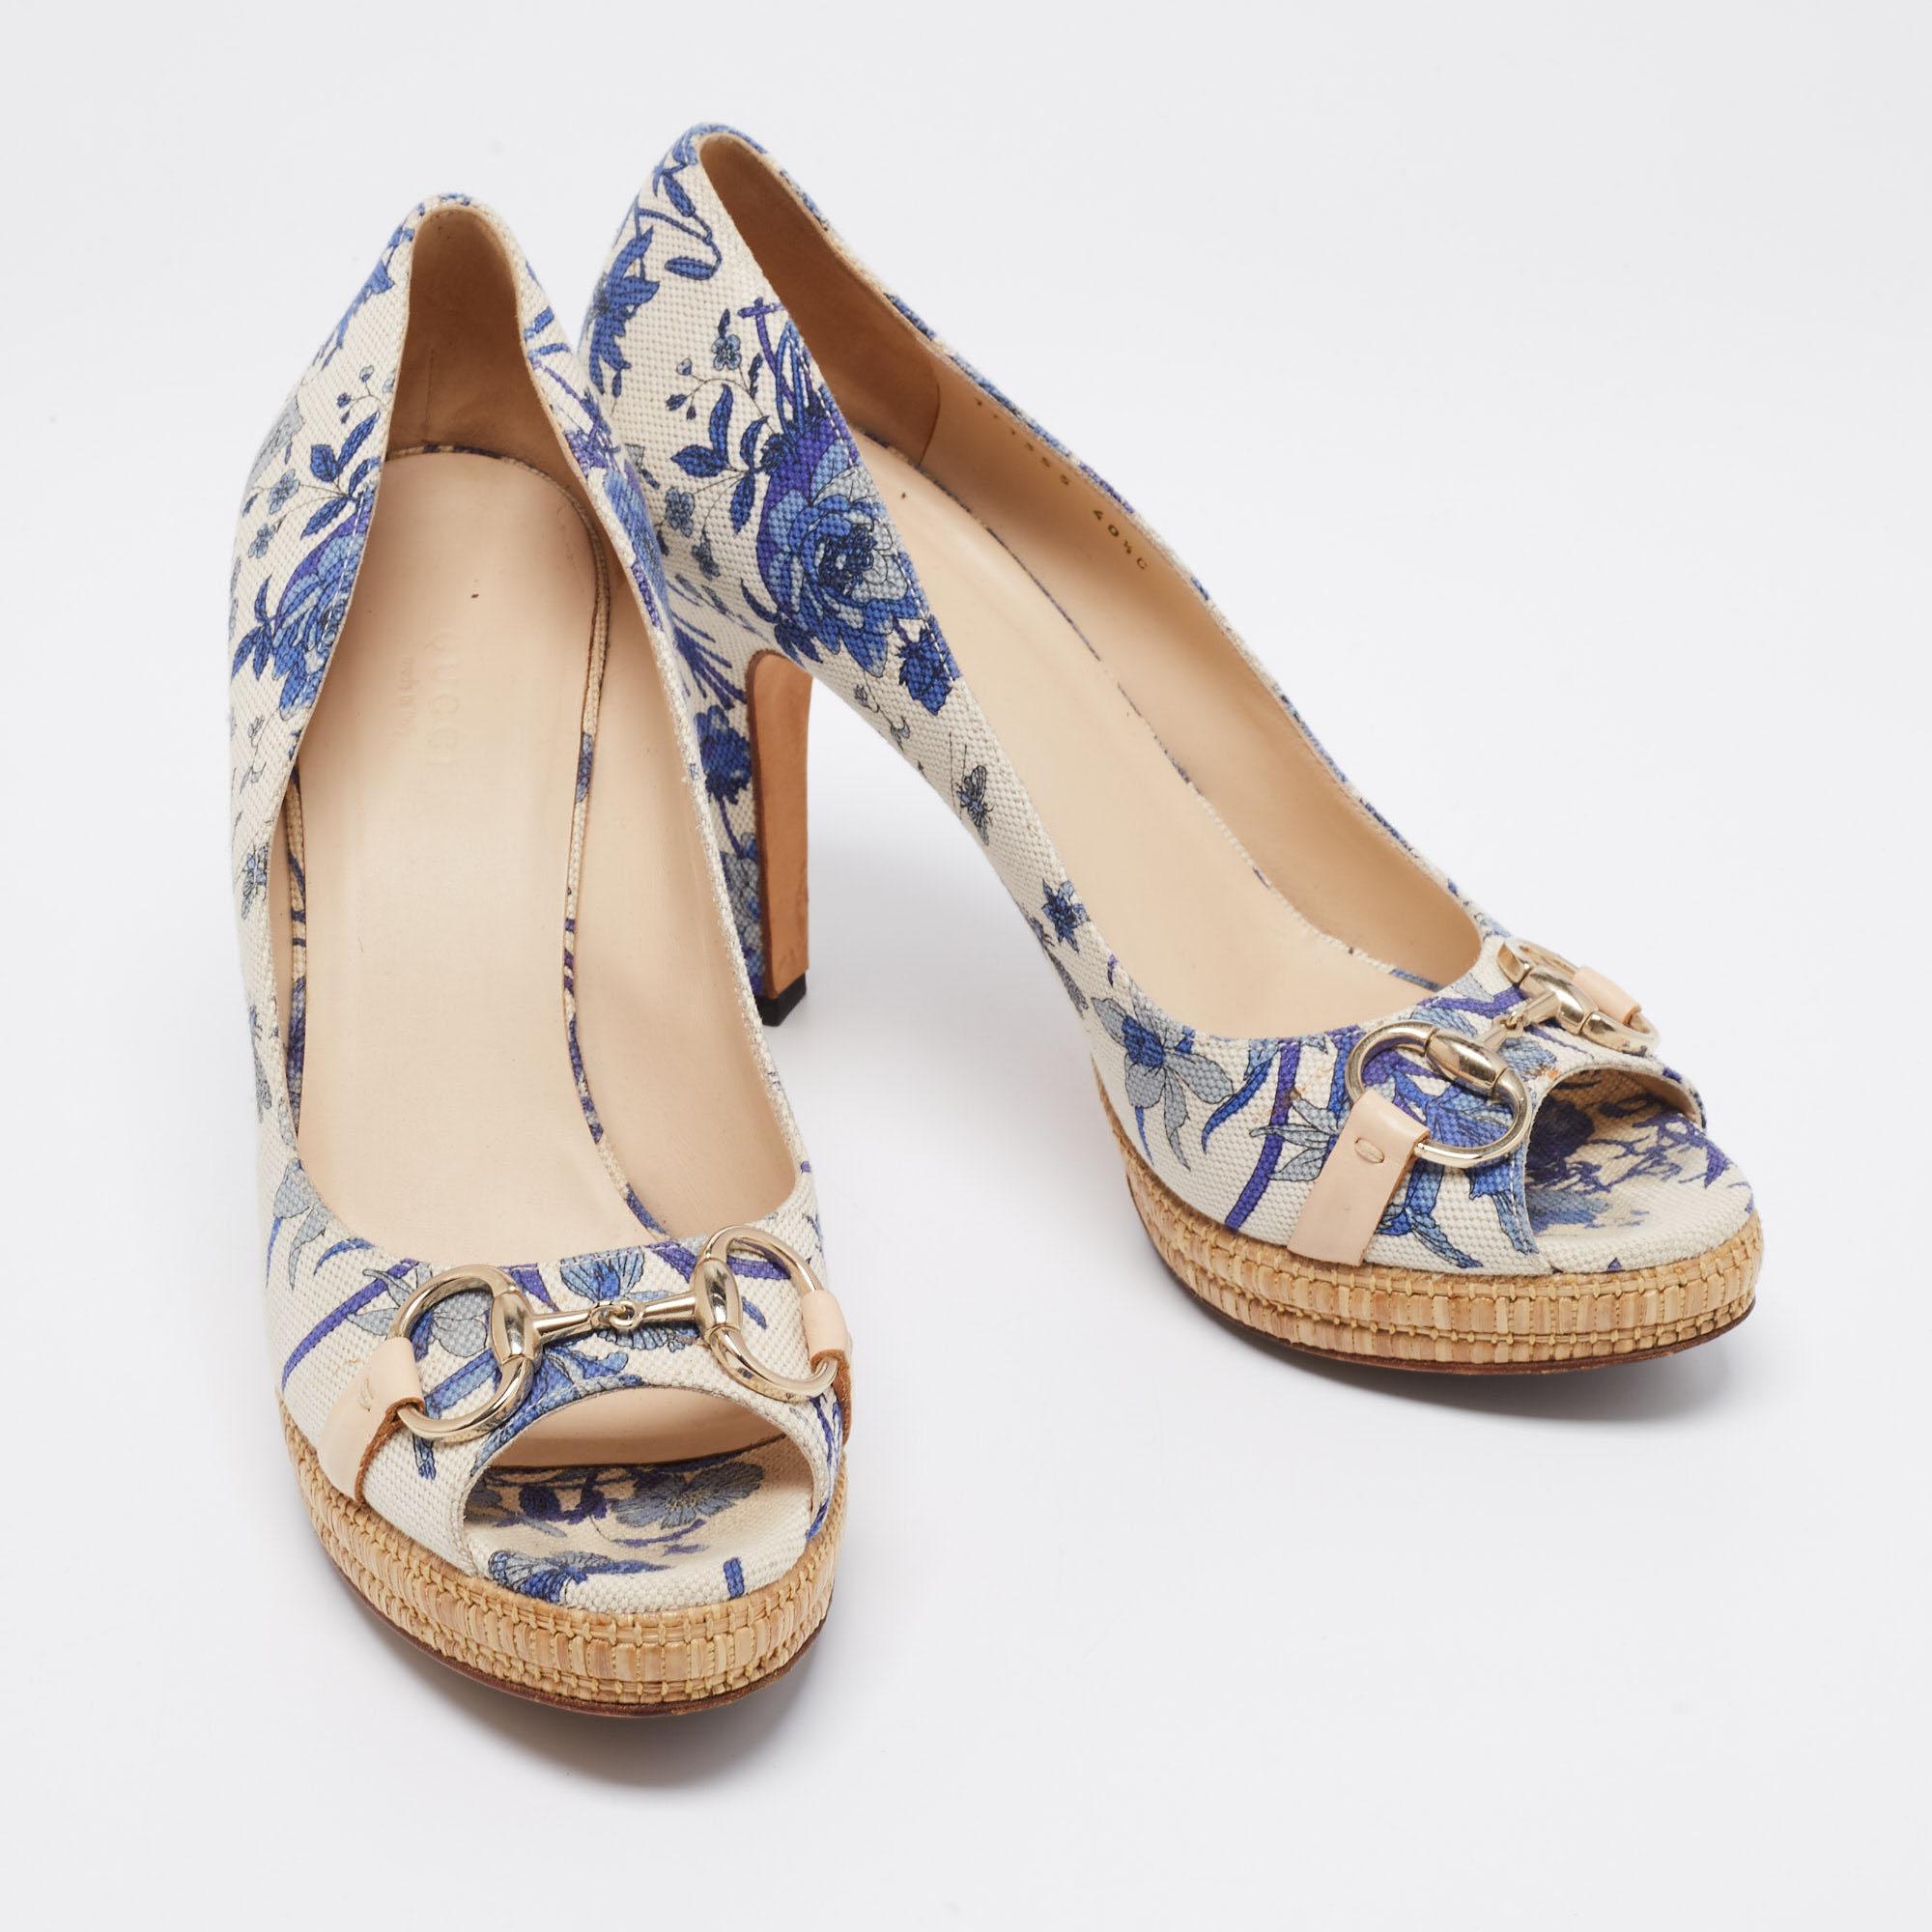 Adorned with a beautiful floral print and Gucci's aesthetics, these pumps will grant your feet unending charm, femininity, and poise! They are crafted using white-blue canvas, with gold-tone Horsebit motifs perched on the peep-toes. They have a